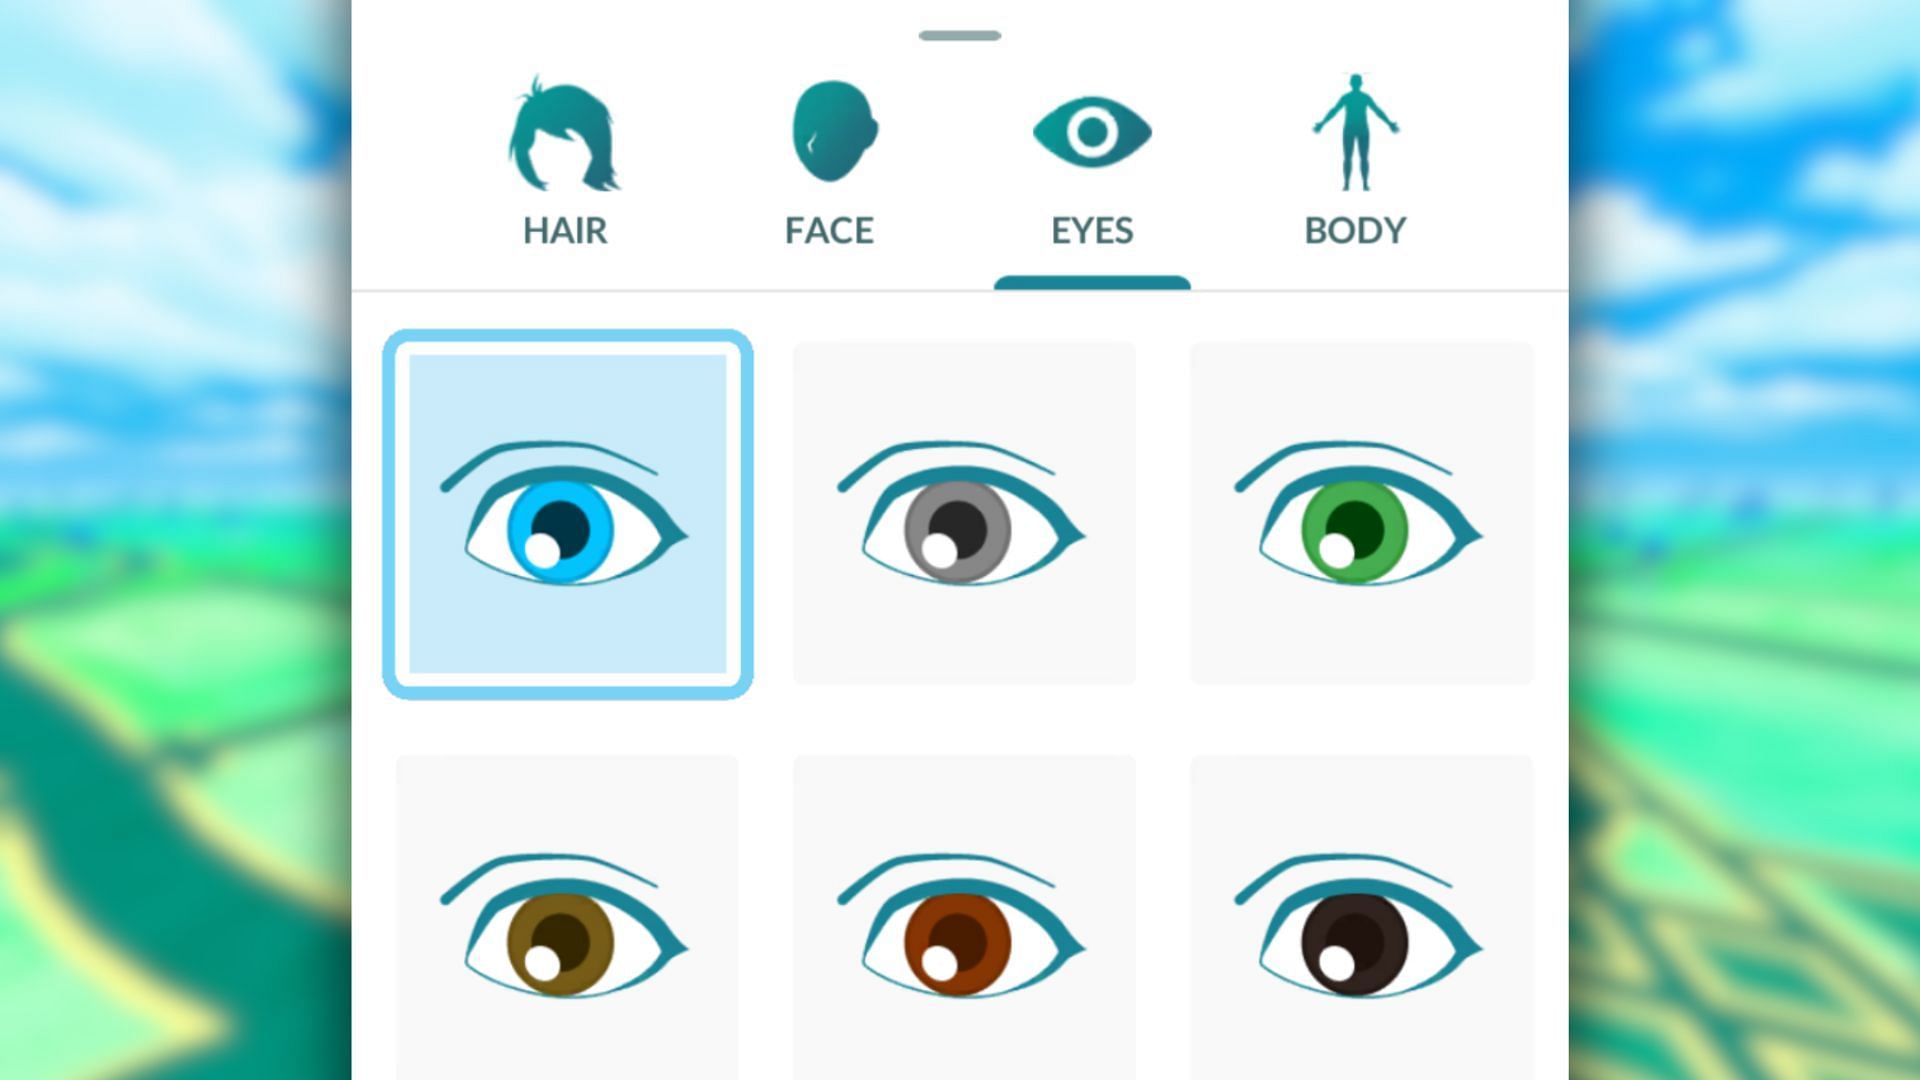 Eye presets available in the game (Image via The Pokemon Company)